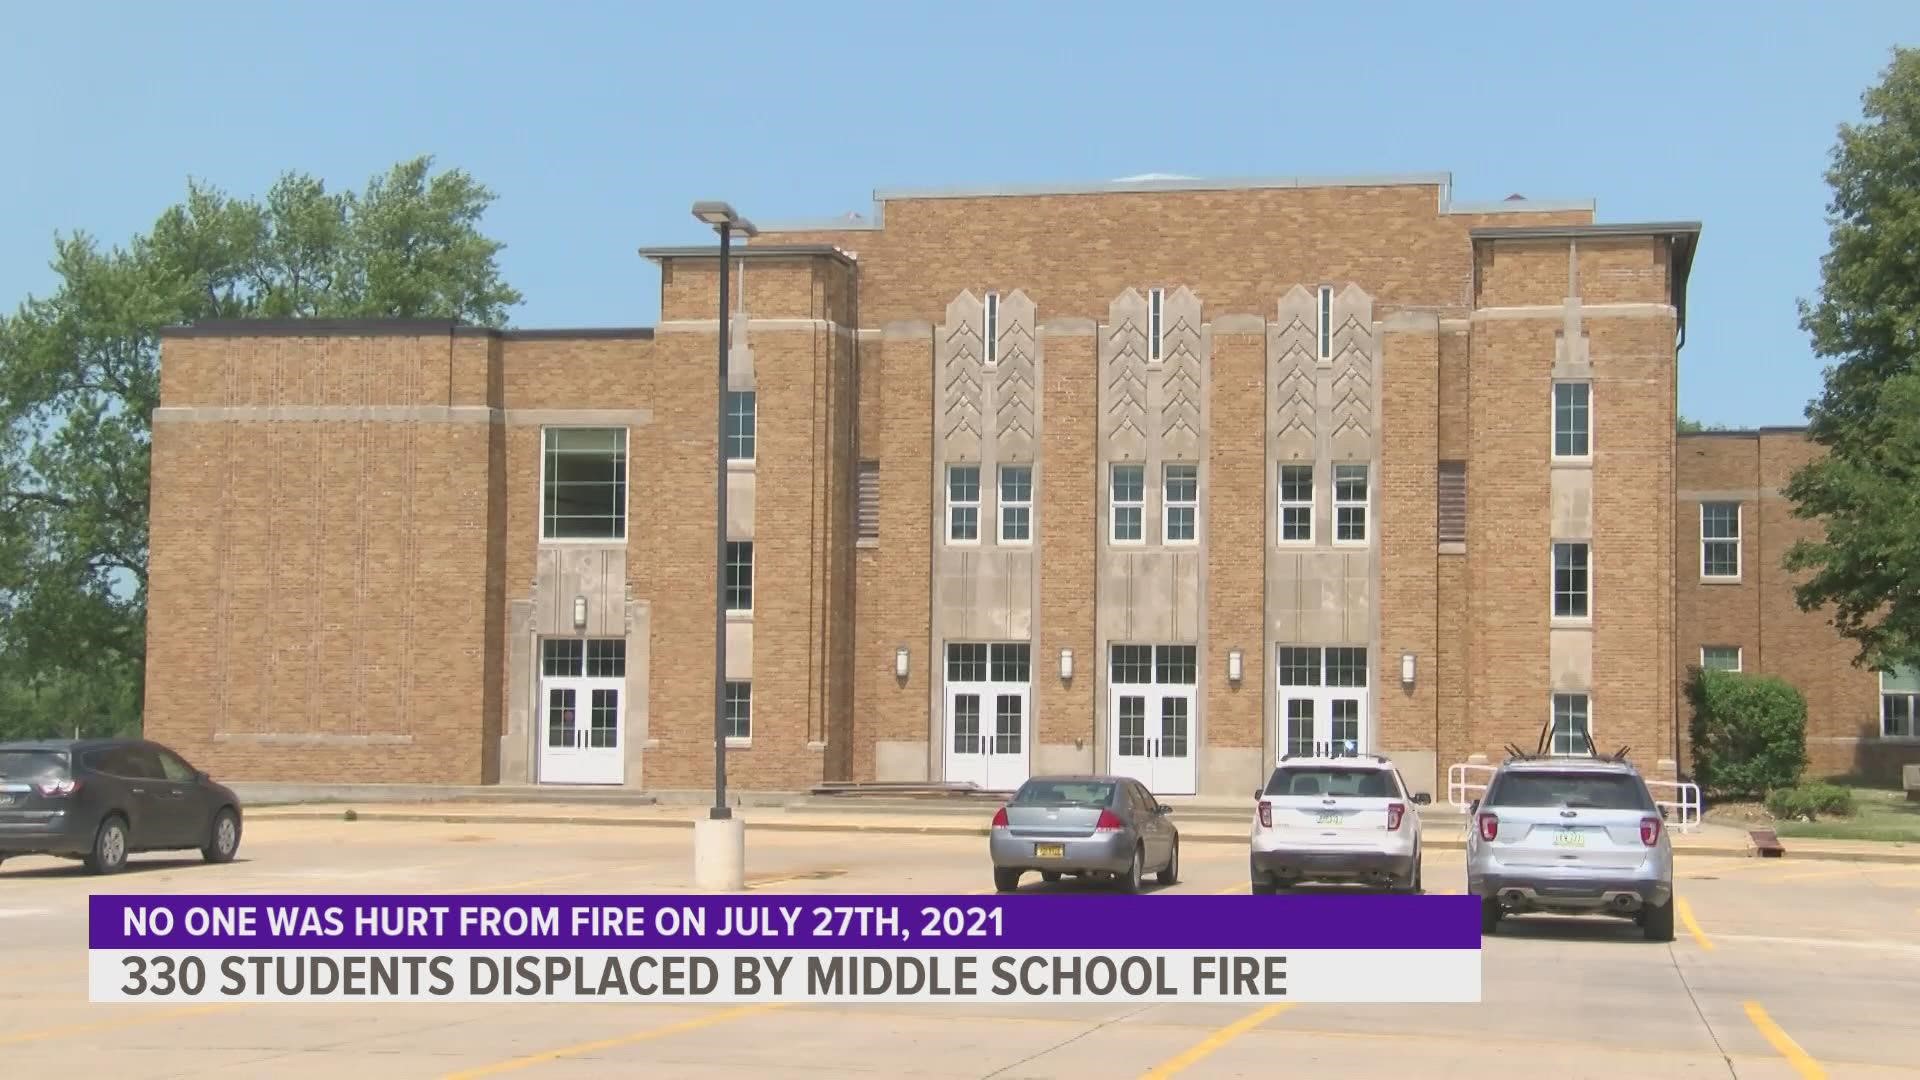 The fire put the middle school out of commission for an entire year, largely due to water damage that spread across as much as 85% of the interior.